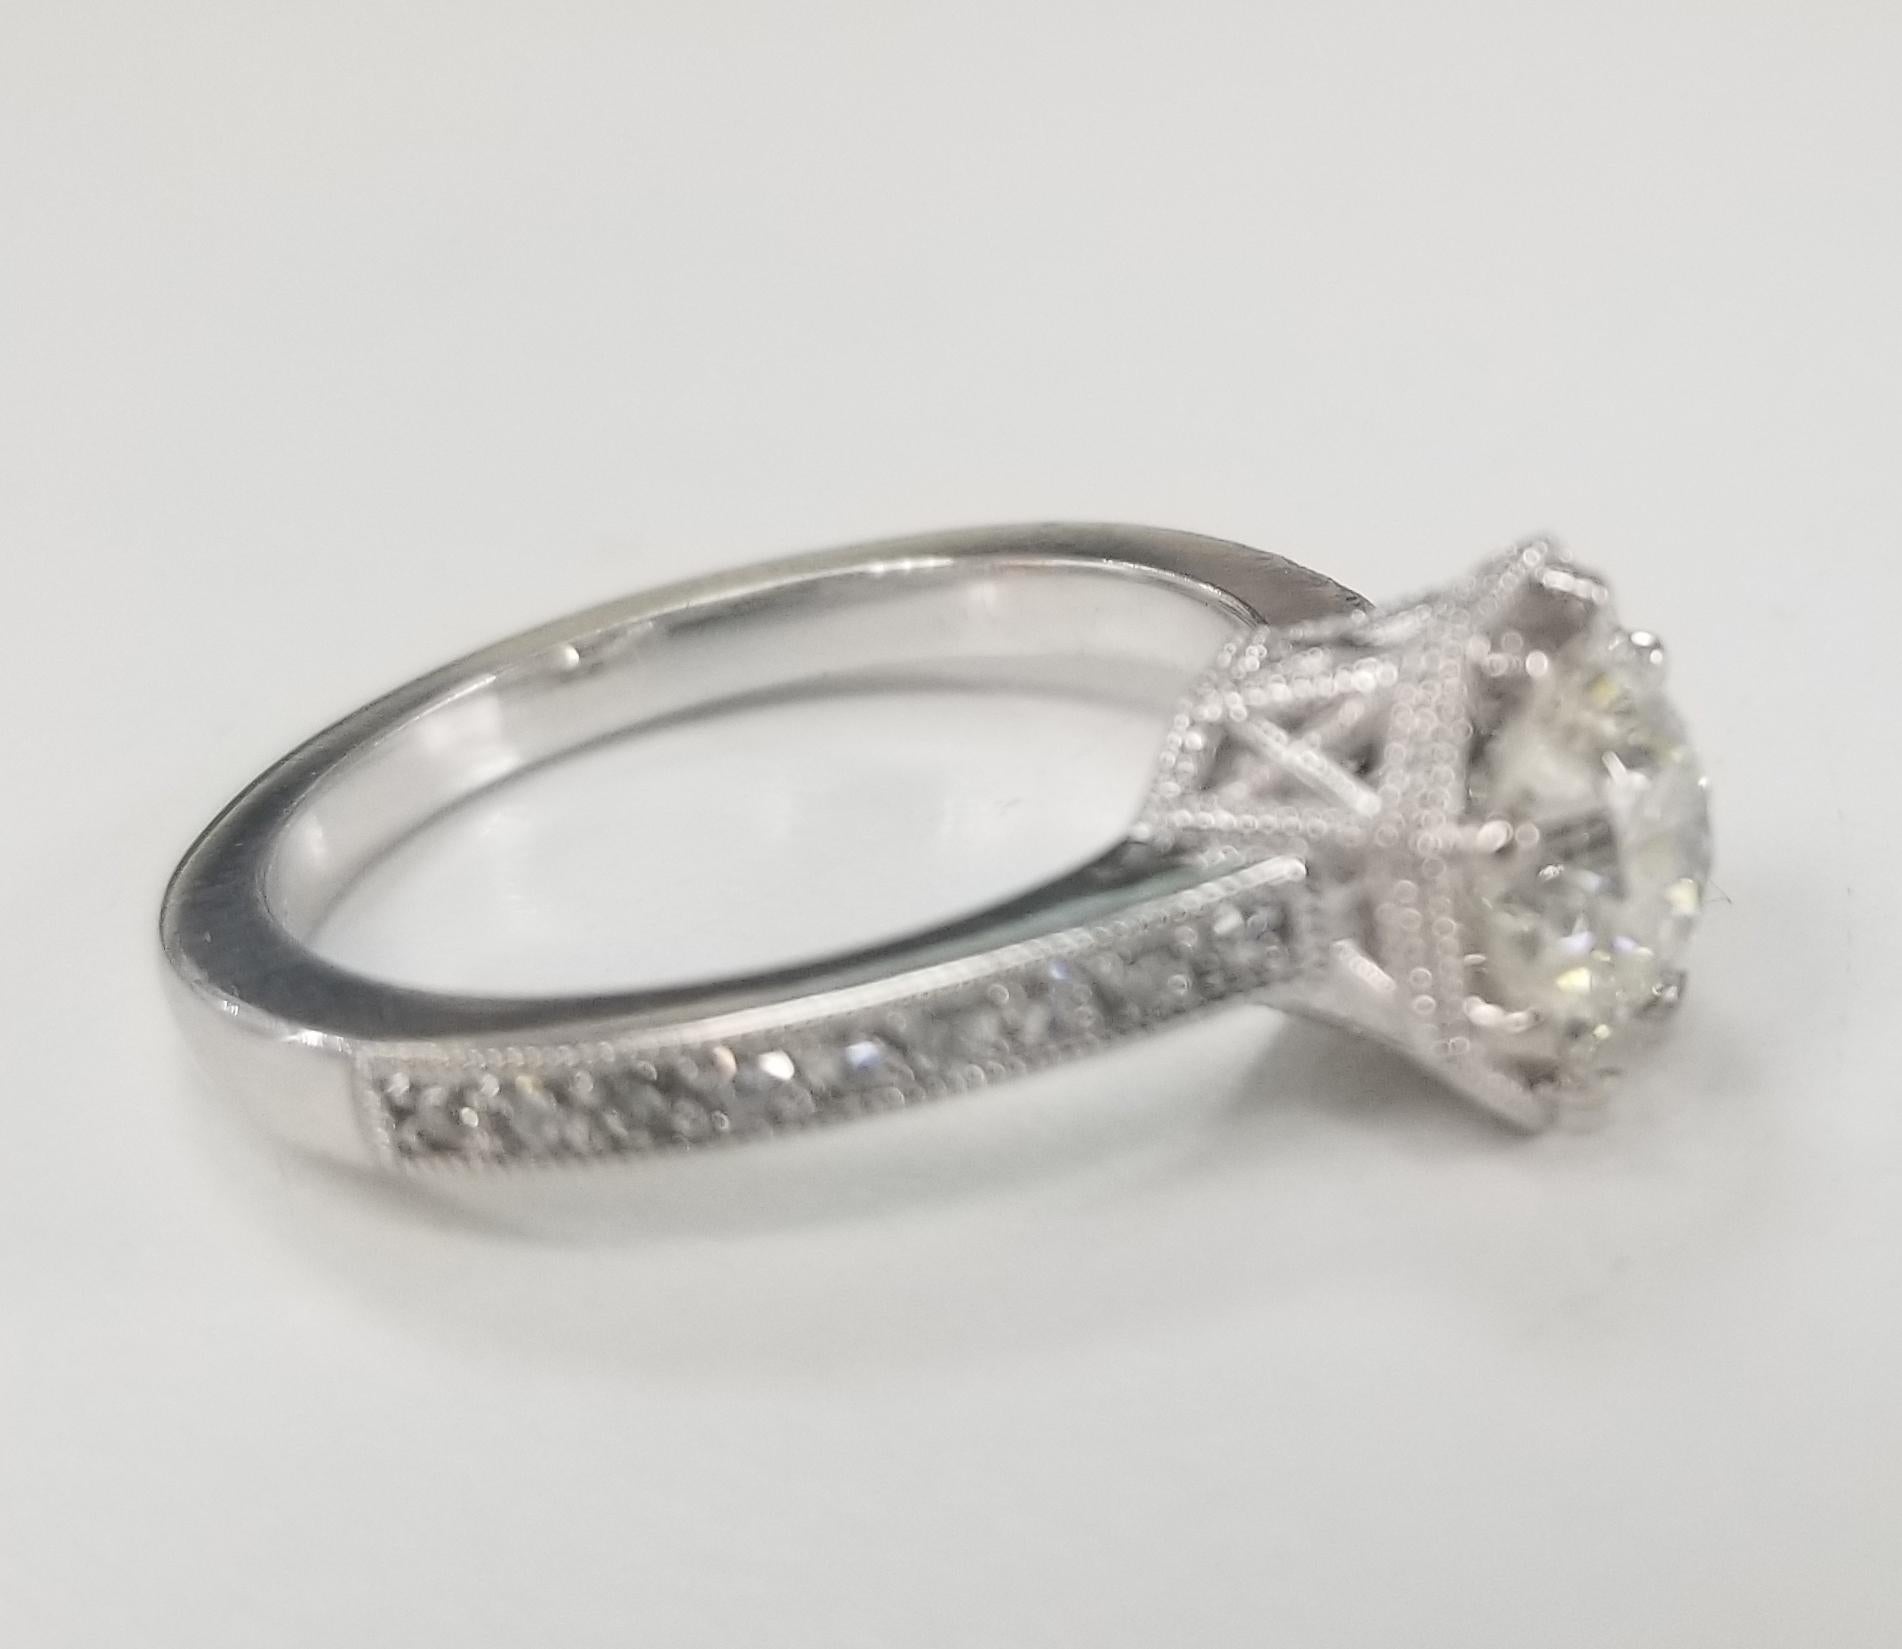 This is a 14k white gold ring with a GIA 1.26 carat Old European cut diamond center, K color, VS2 clarity. The ring has an engraving inside its shank with 18 single cut diamonds weighing .25pts.,. It has a current ring size of 6.75 US that can be